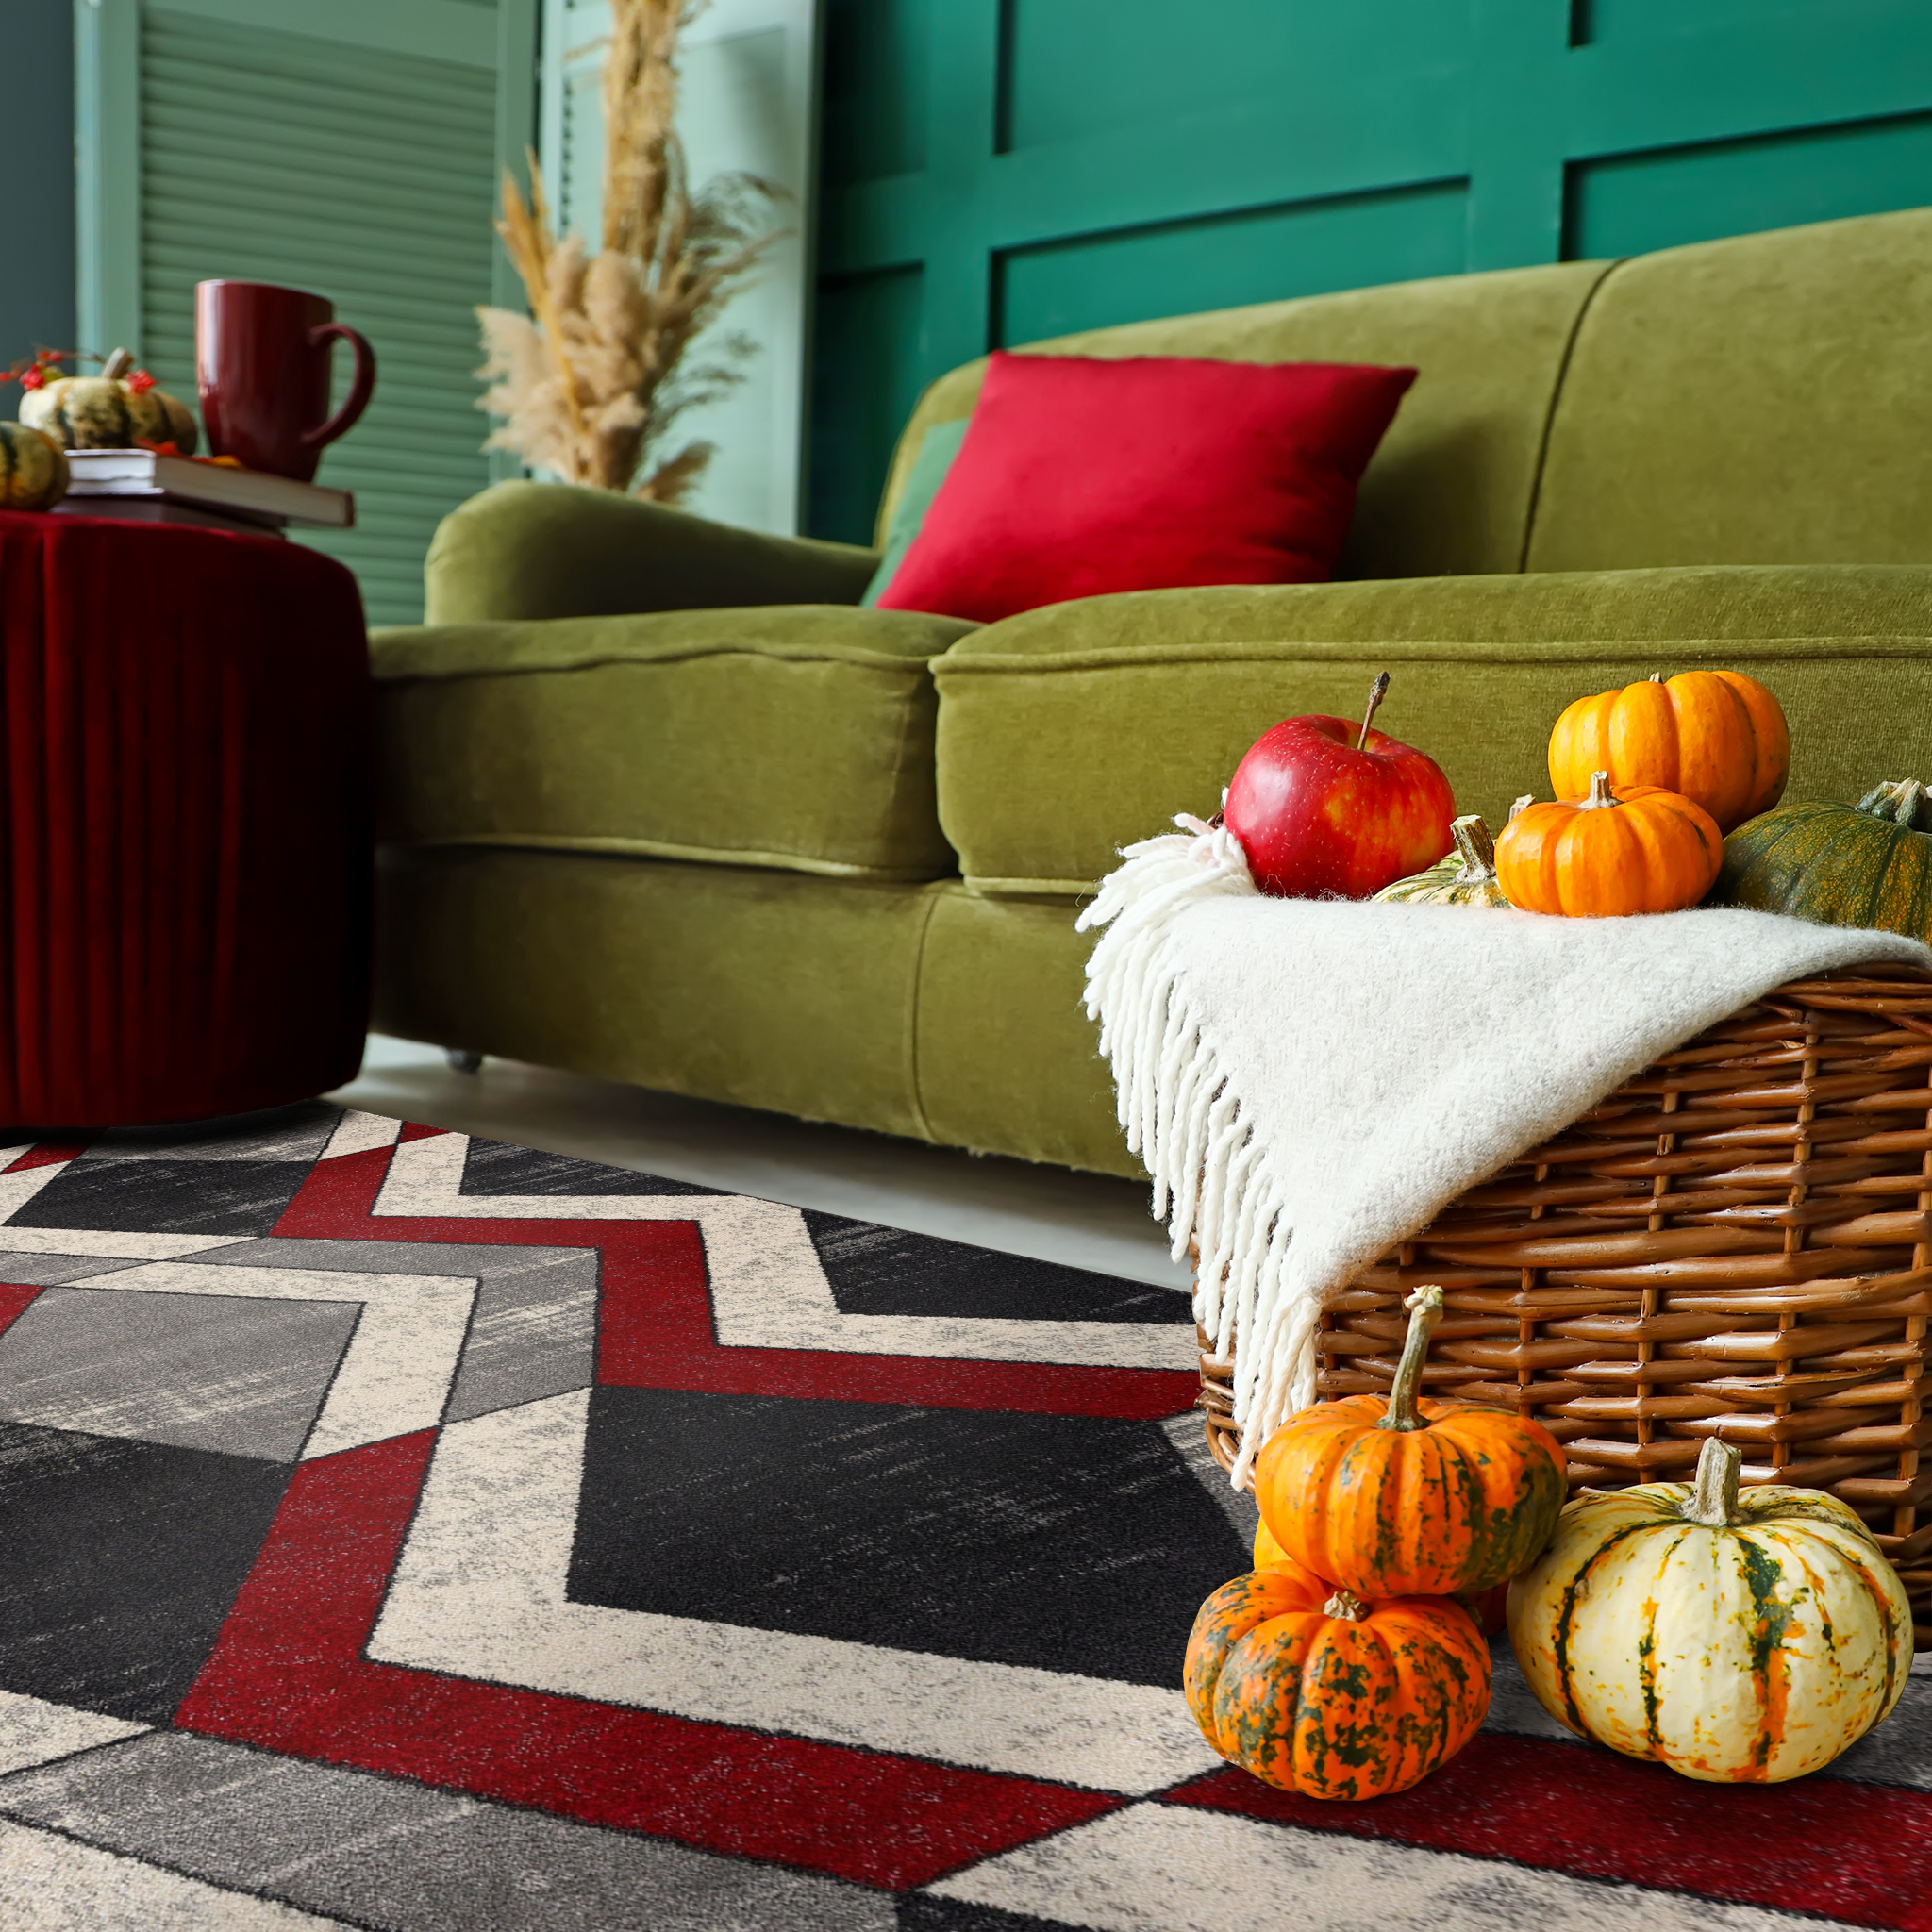 Twist Zigzag Rug in a cozy living room with fall decor, green sofa against a green wall, red pillow, rattan basket full of pumpkins and apples